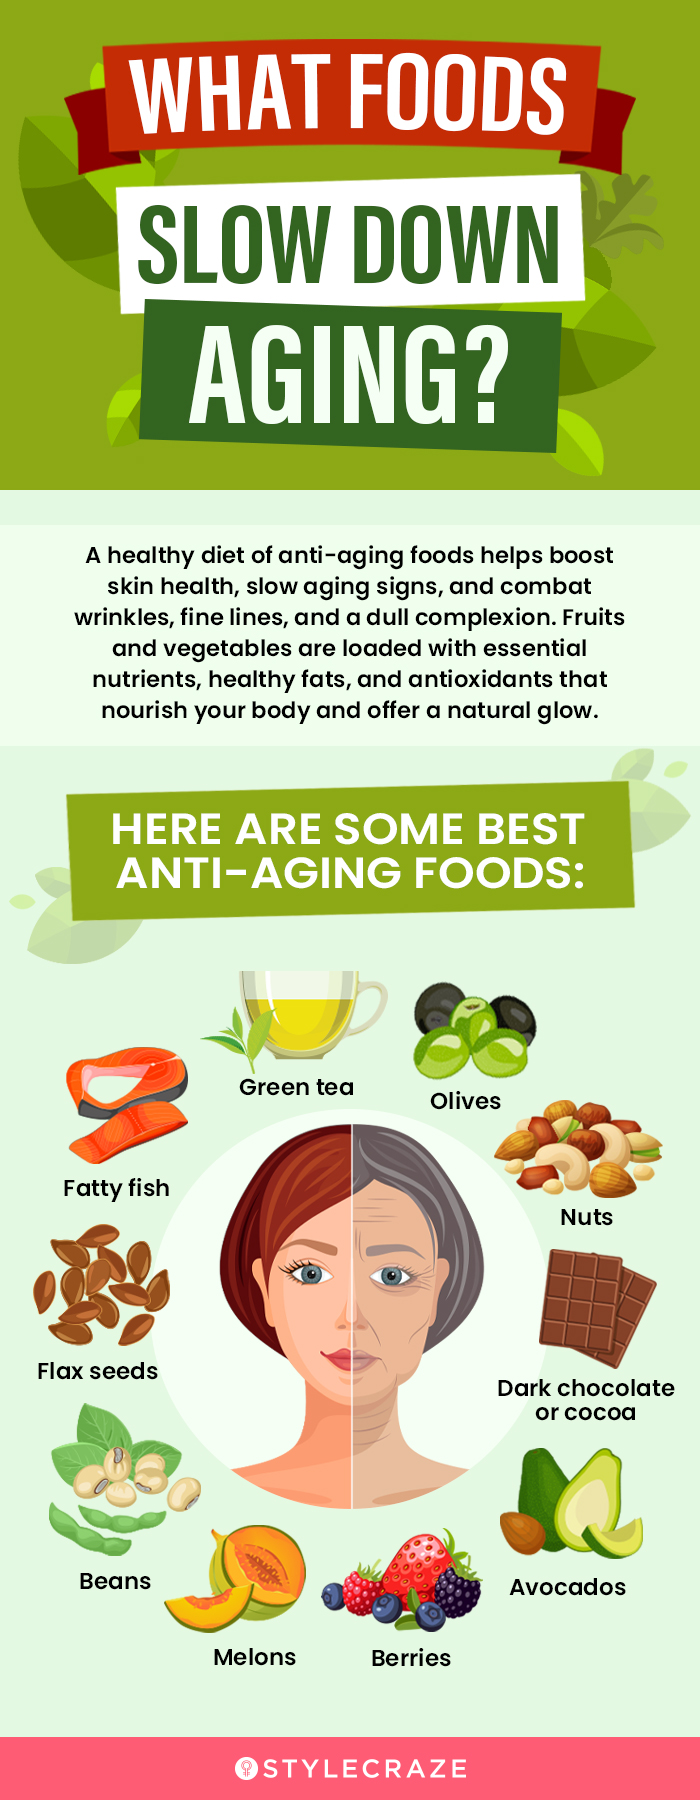 what foods slow down aging [infographic]